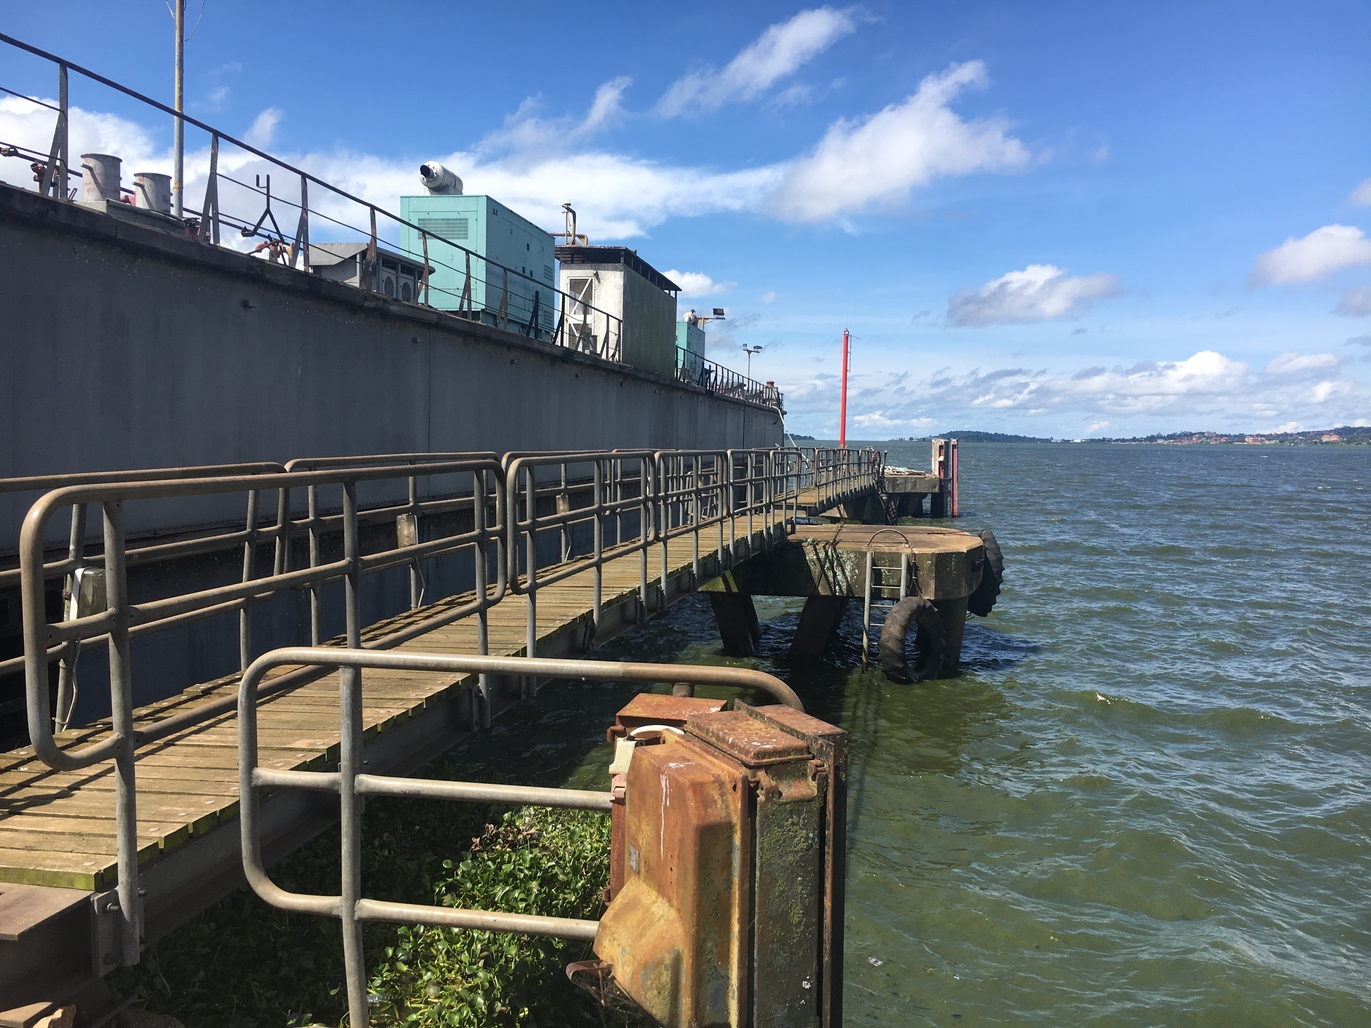 Work set to start on pioneering freight ferry across Lake Victoria